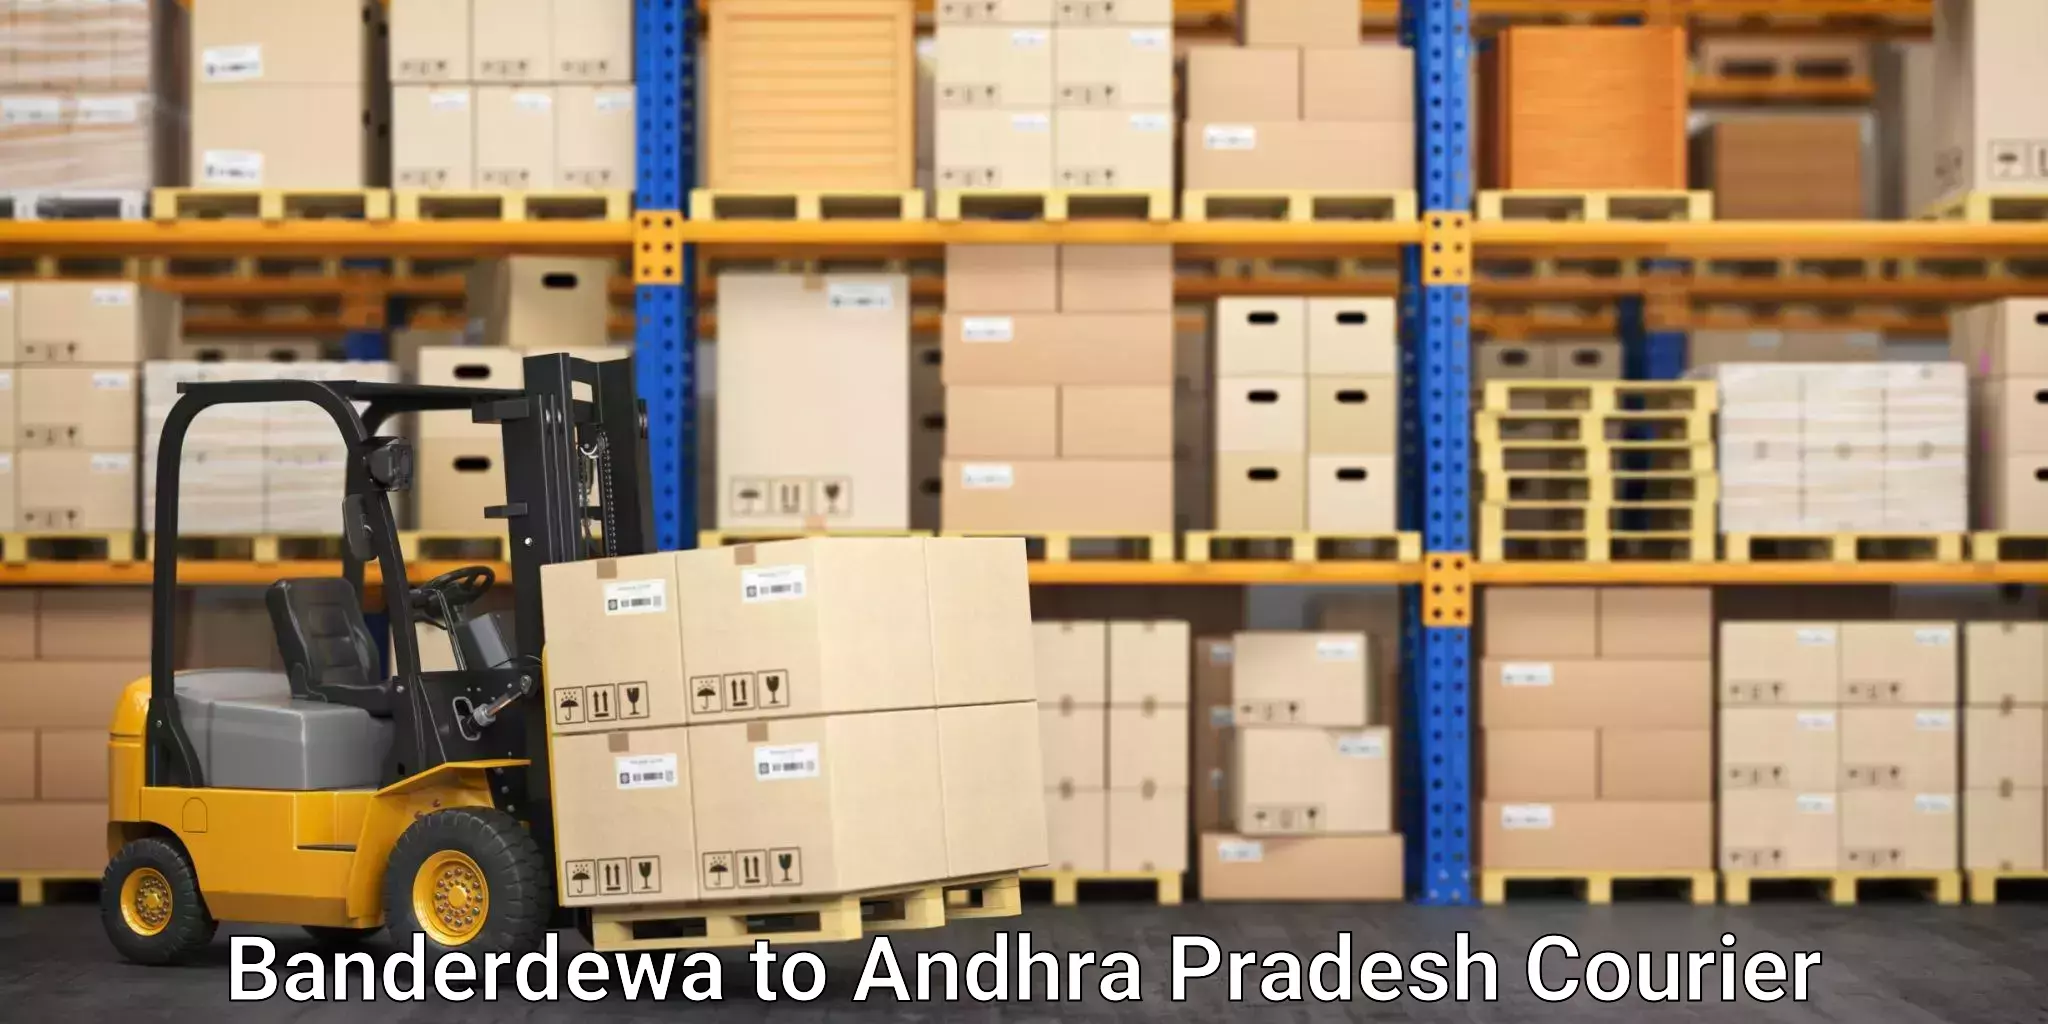 Multi-national courier services Banderdewa to Andhra Pradesh